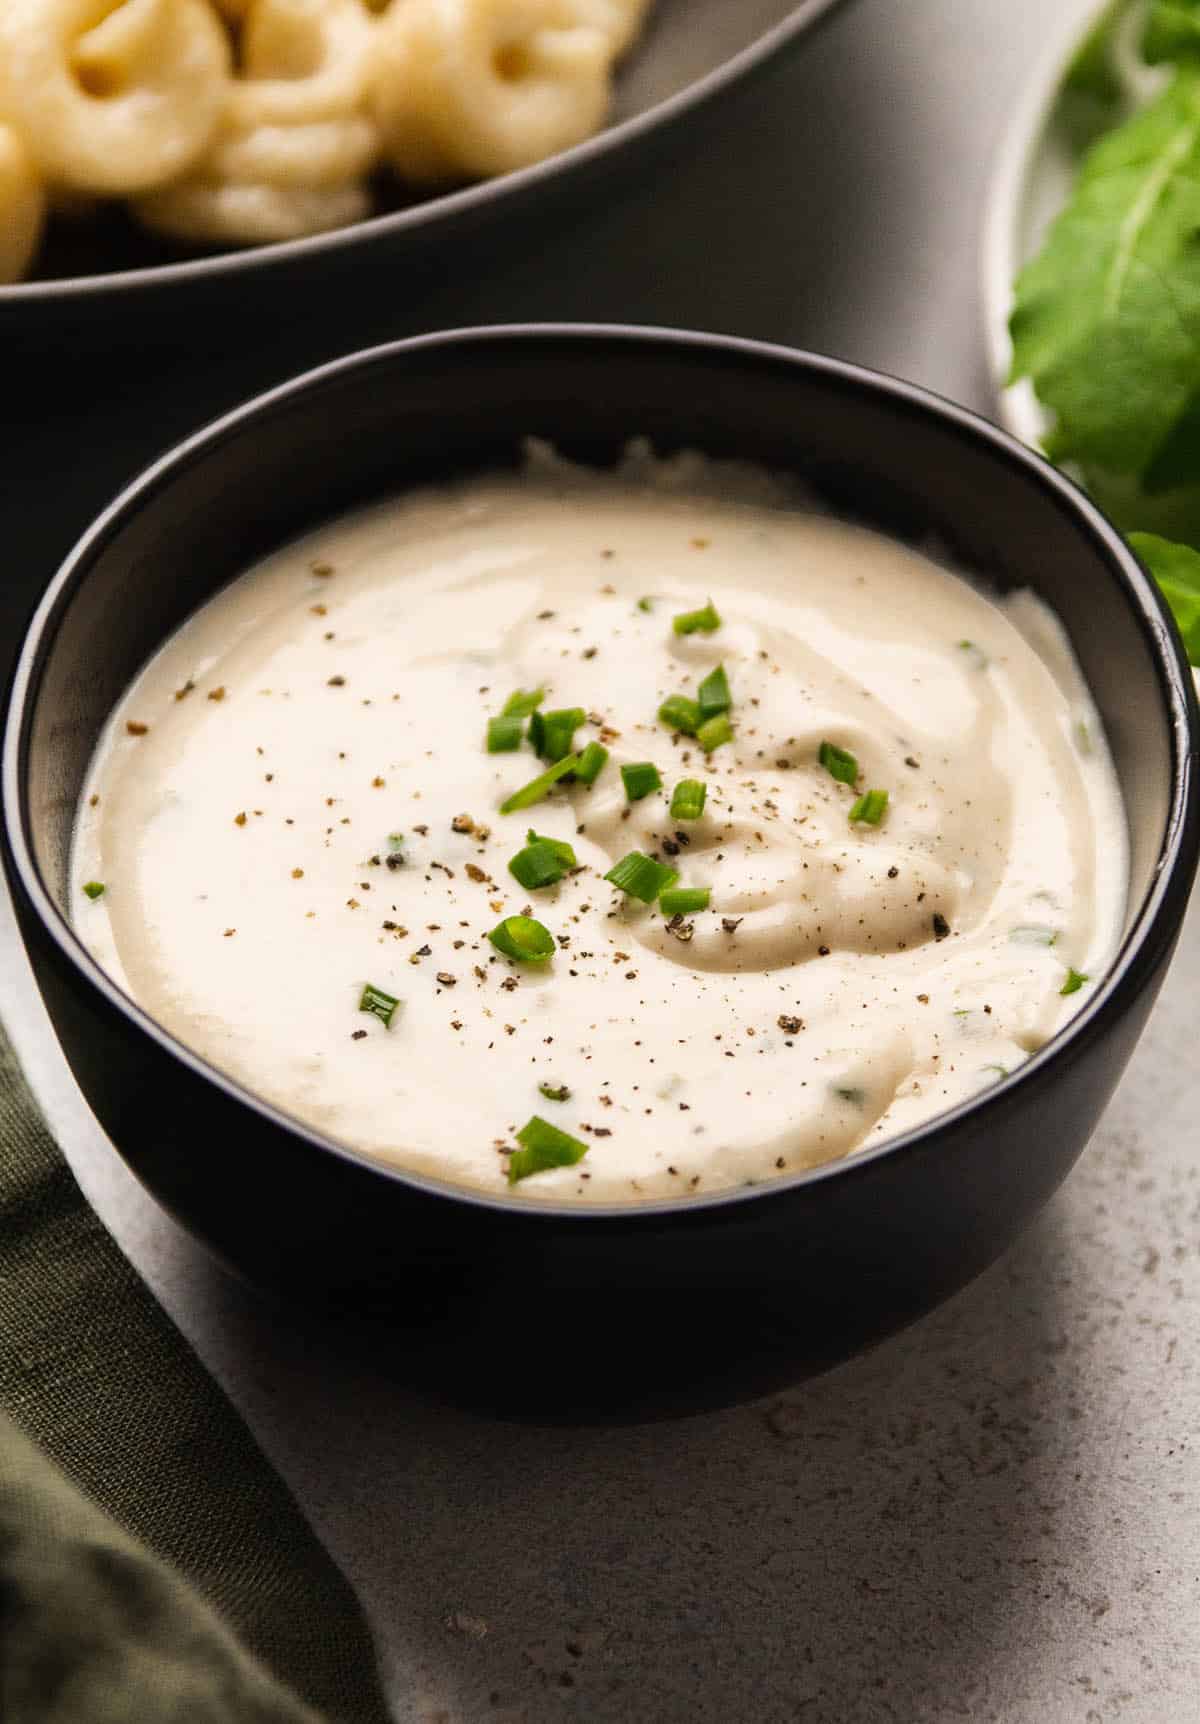 Sour cream sauce in a black bowl, topped with black pepper and fresh chives.